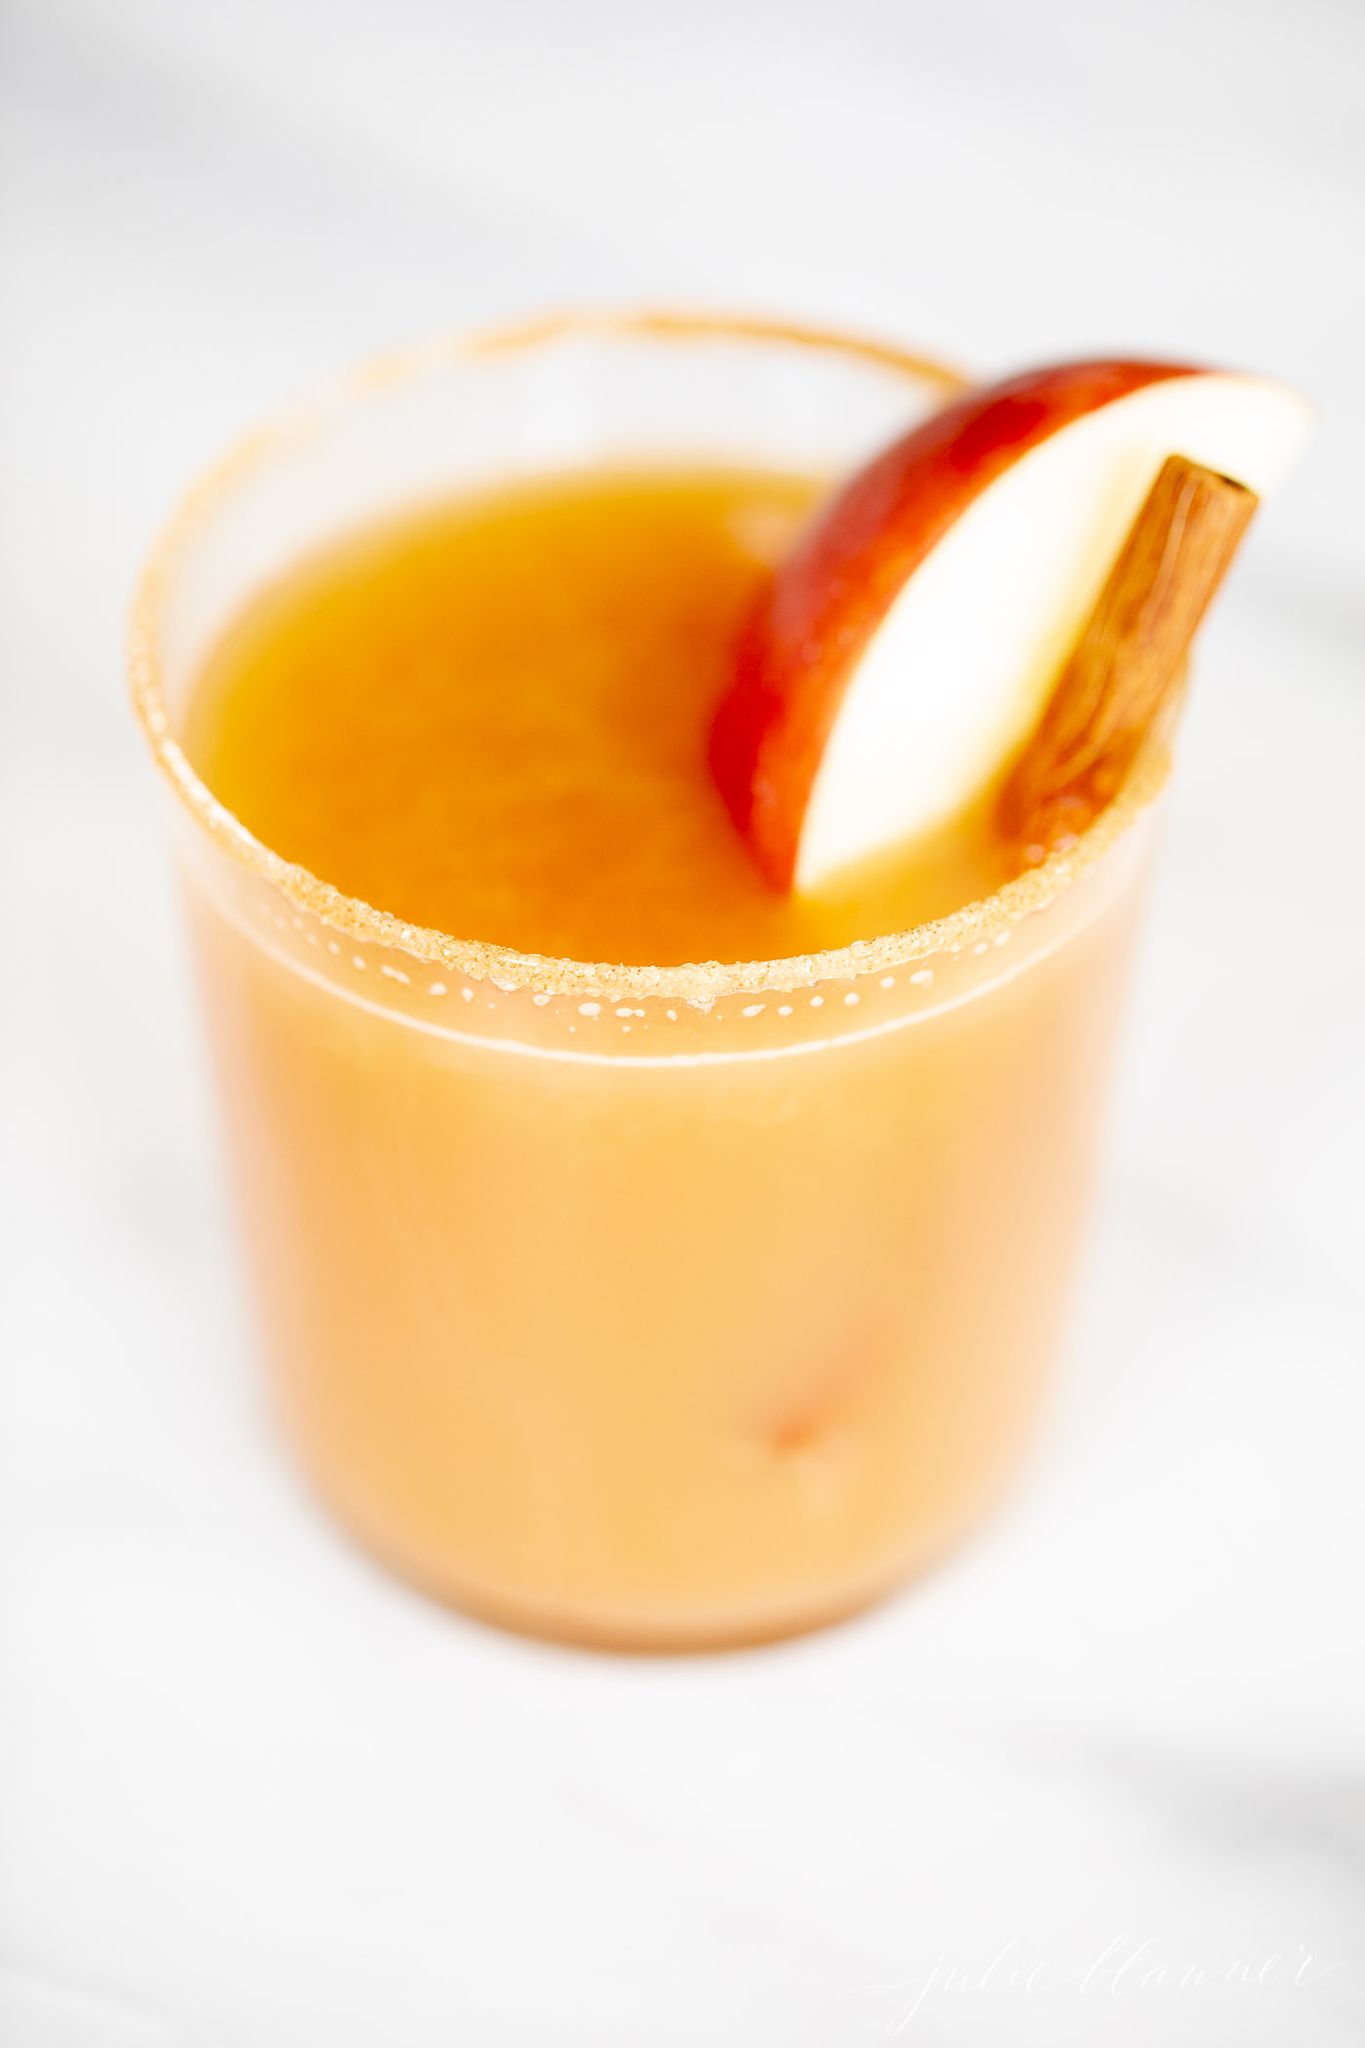 A christmas cocktail garnished with an apple slice and cinnamon stick